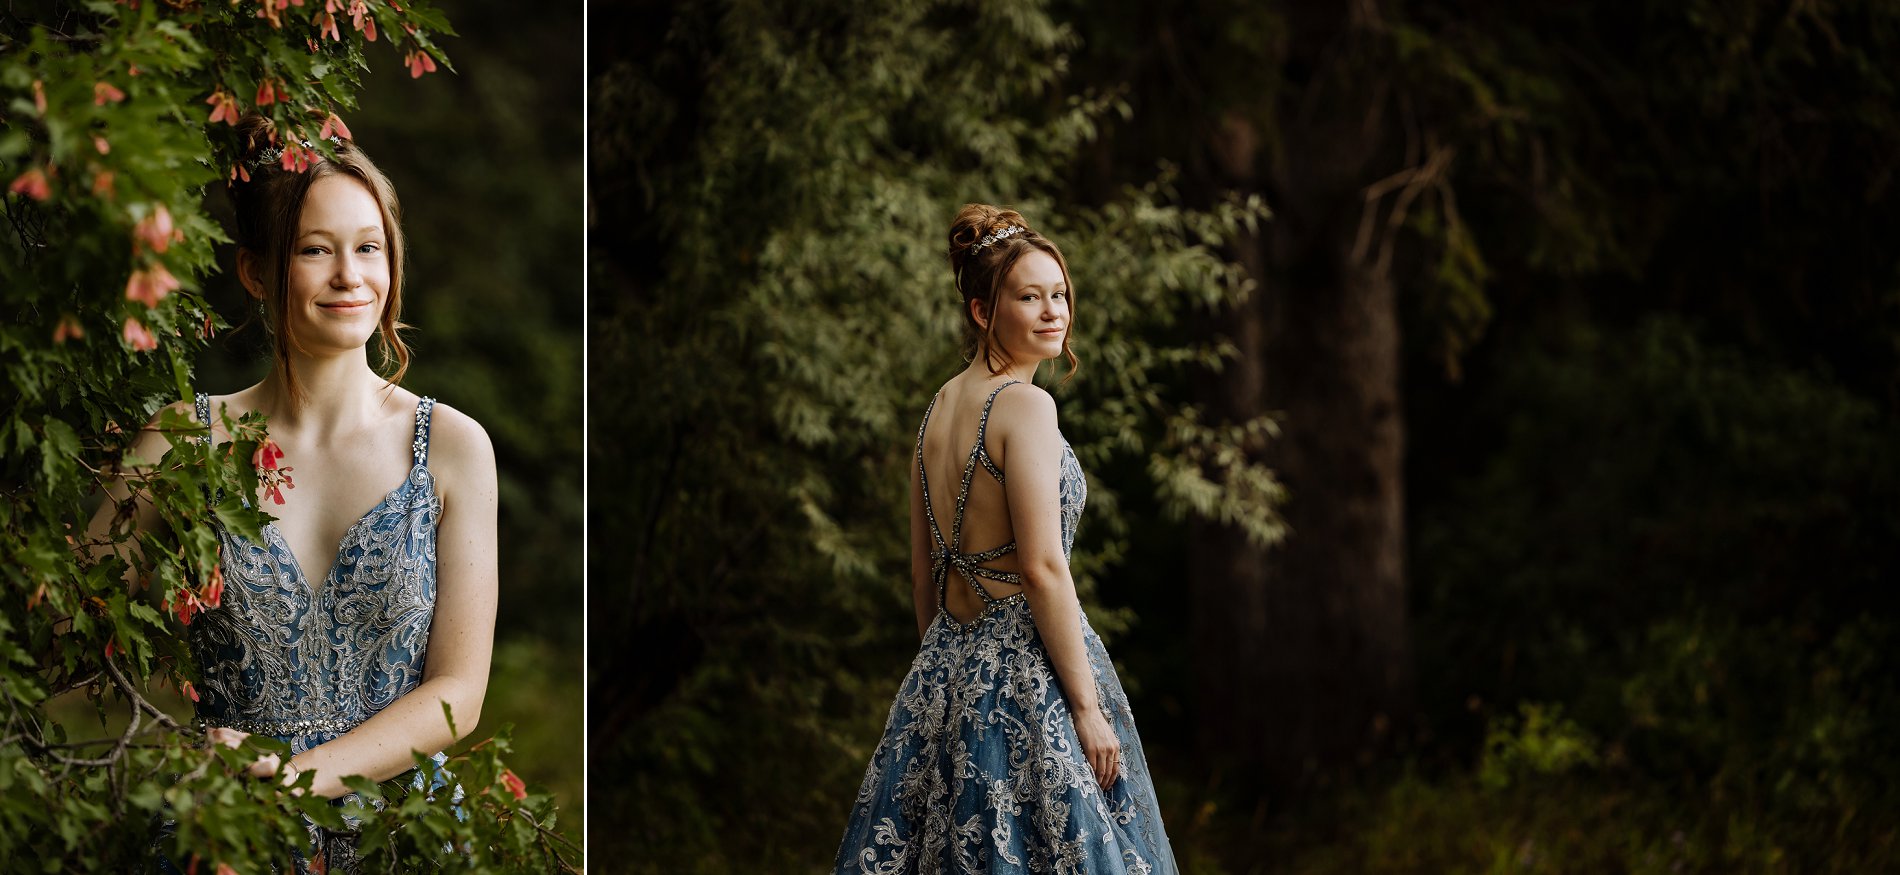 High school girl in blue dress and tiara poses for her graduation photos in a forest with dramatic moody light.